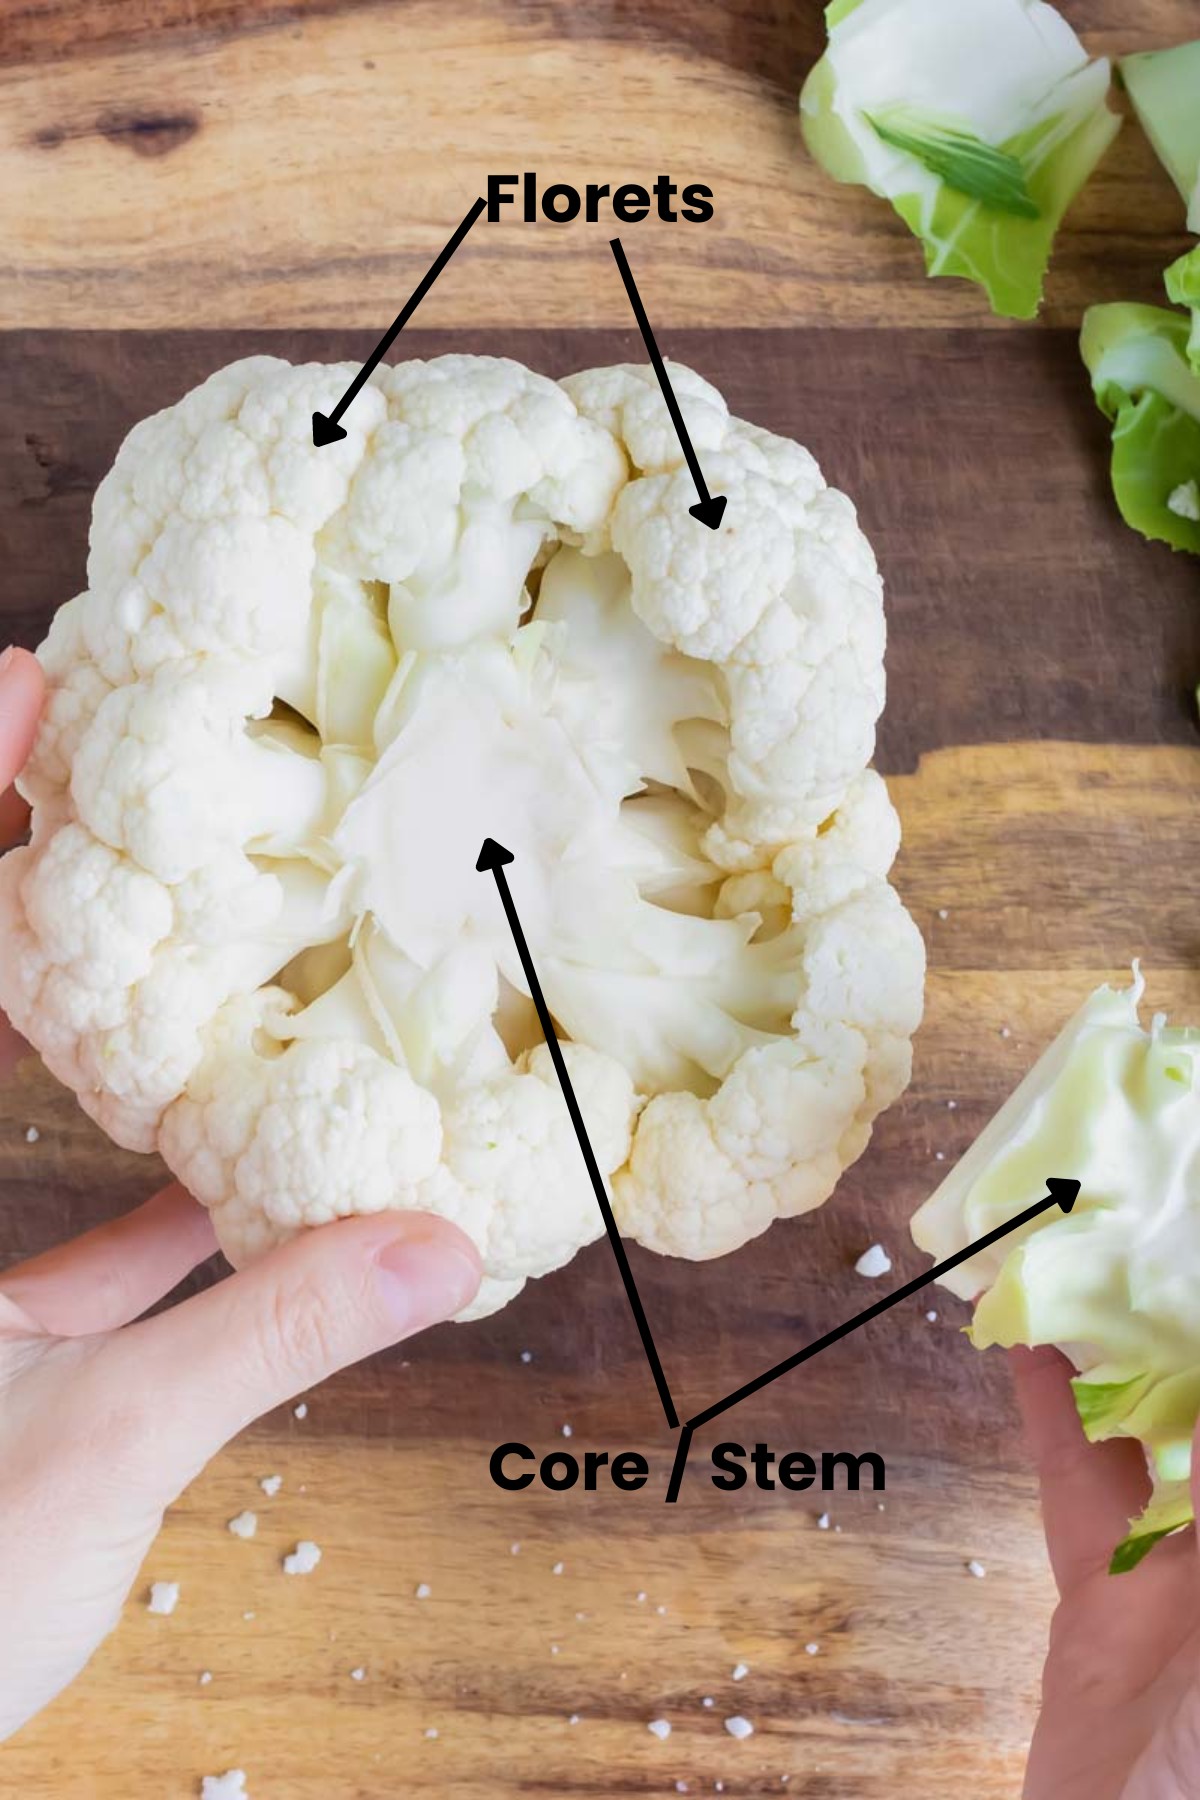 A head of cauliflower that has arrows pointing to the stem that has been cut off and the core that is exposed.